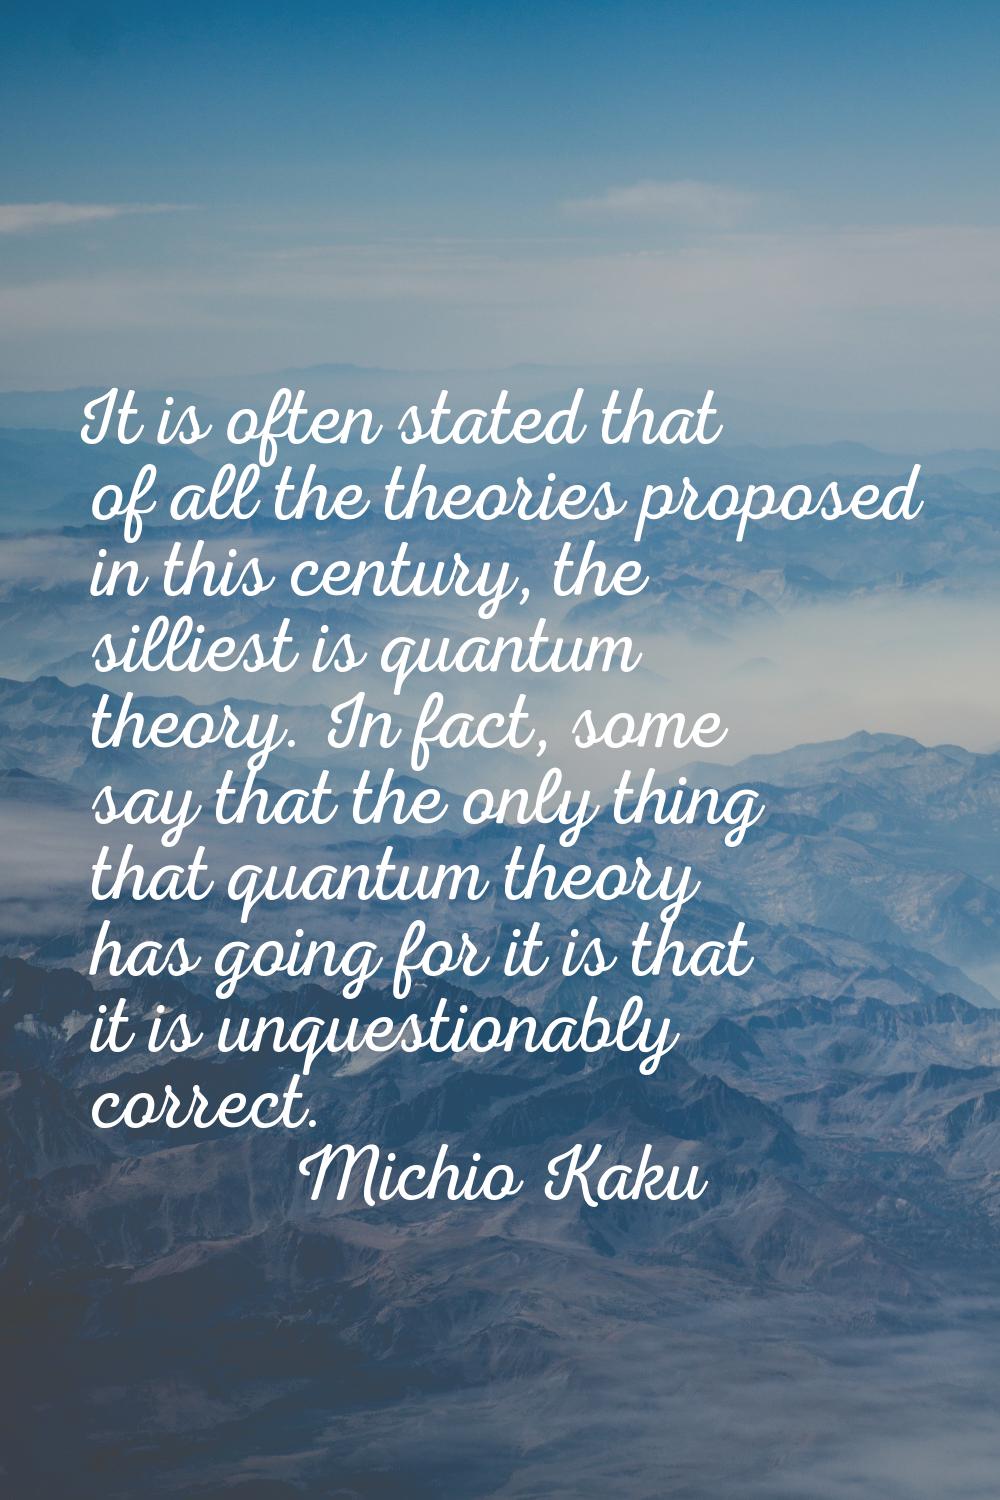 It is often stated that of all the theories proposed in this century, the silliest is quantum theor